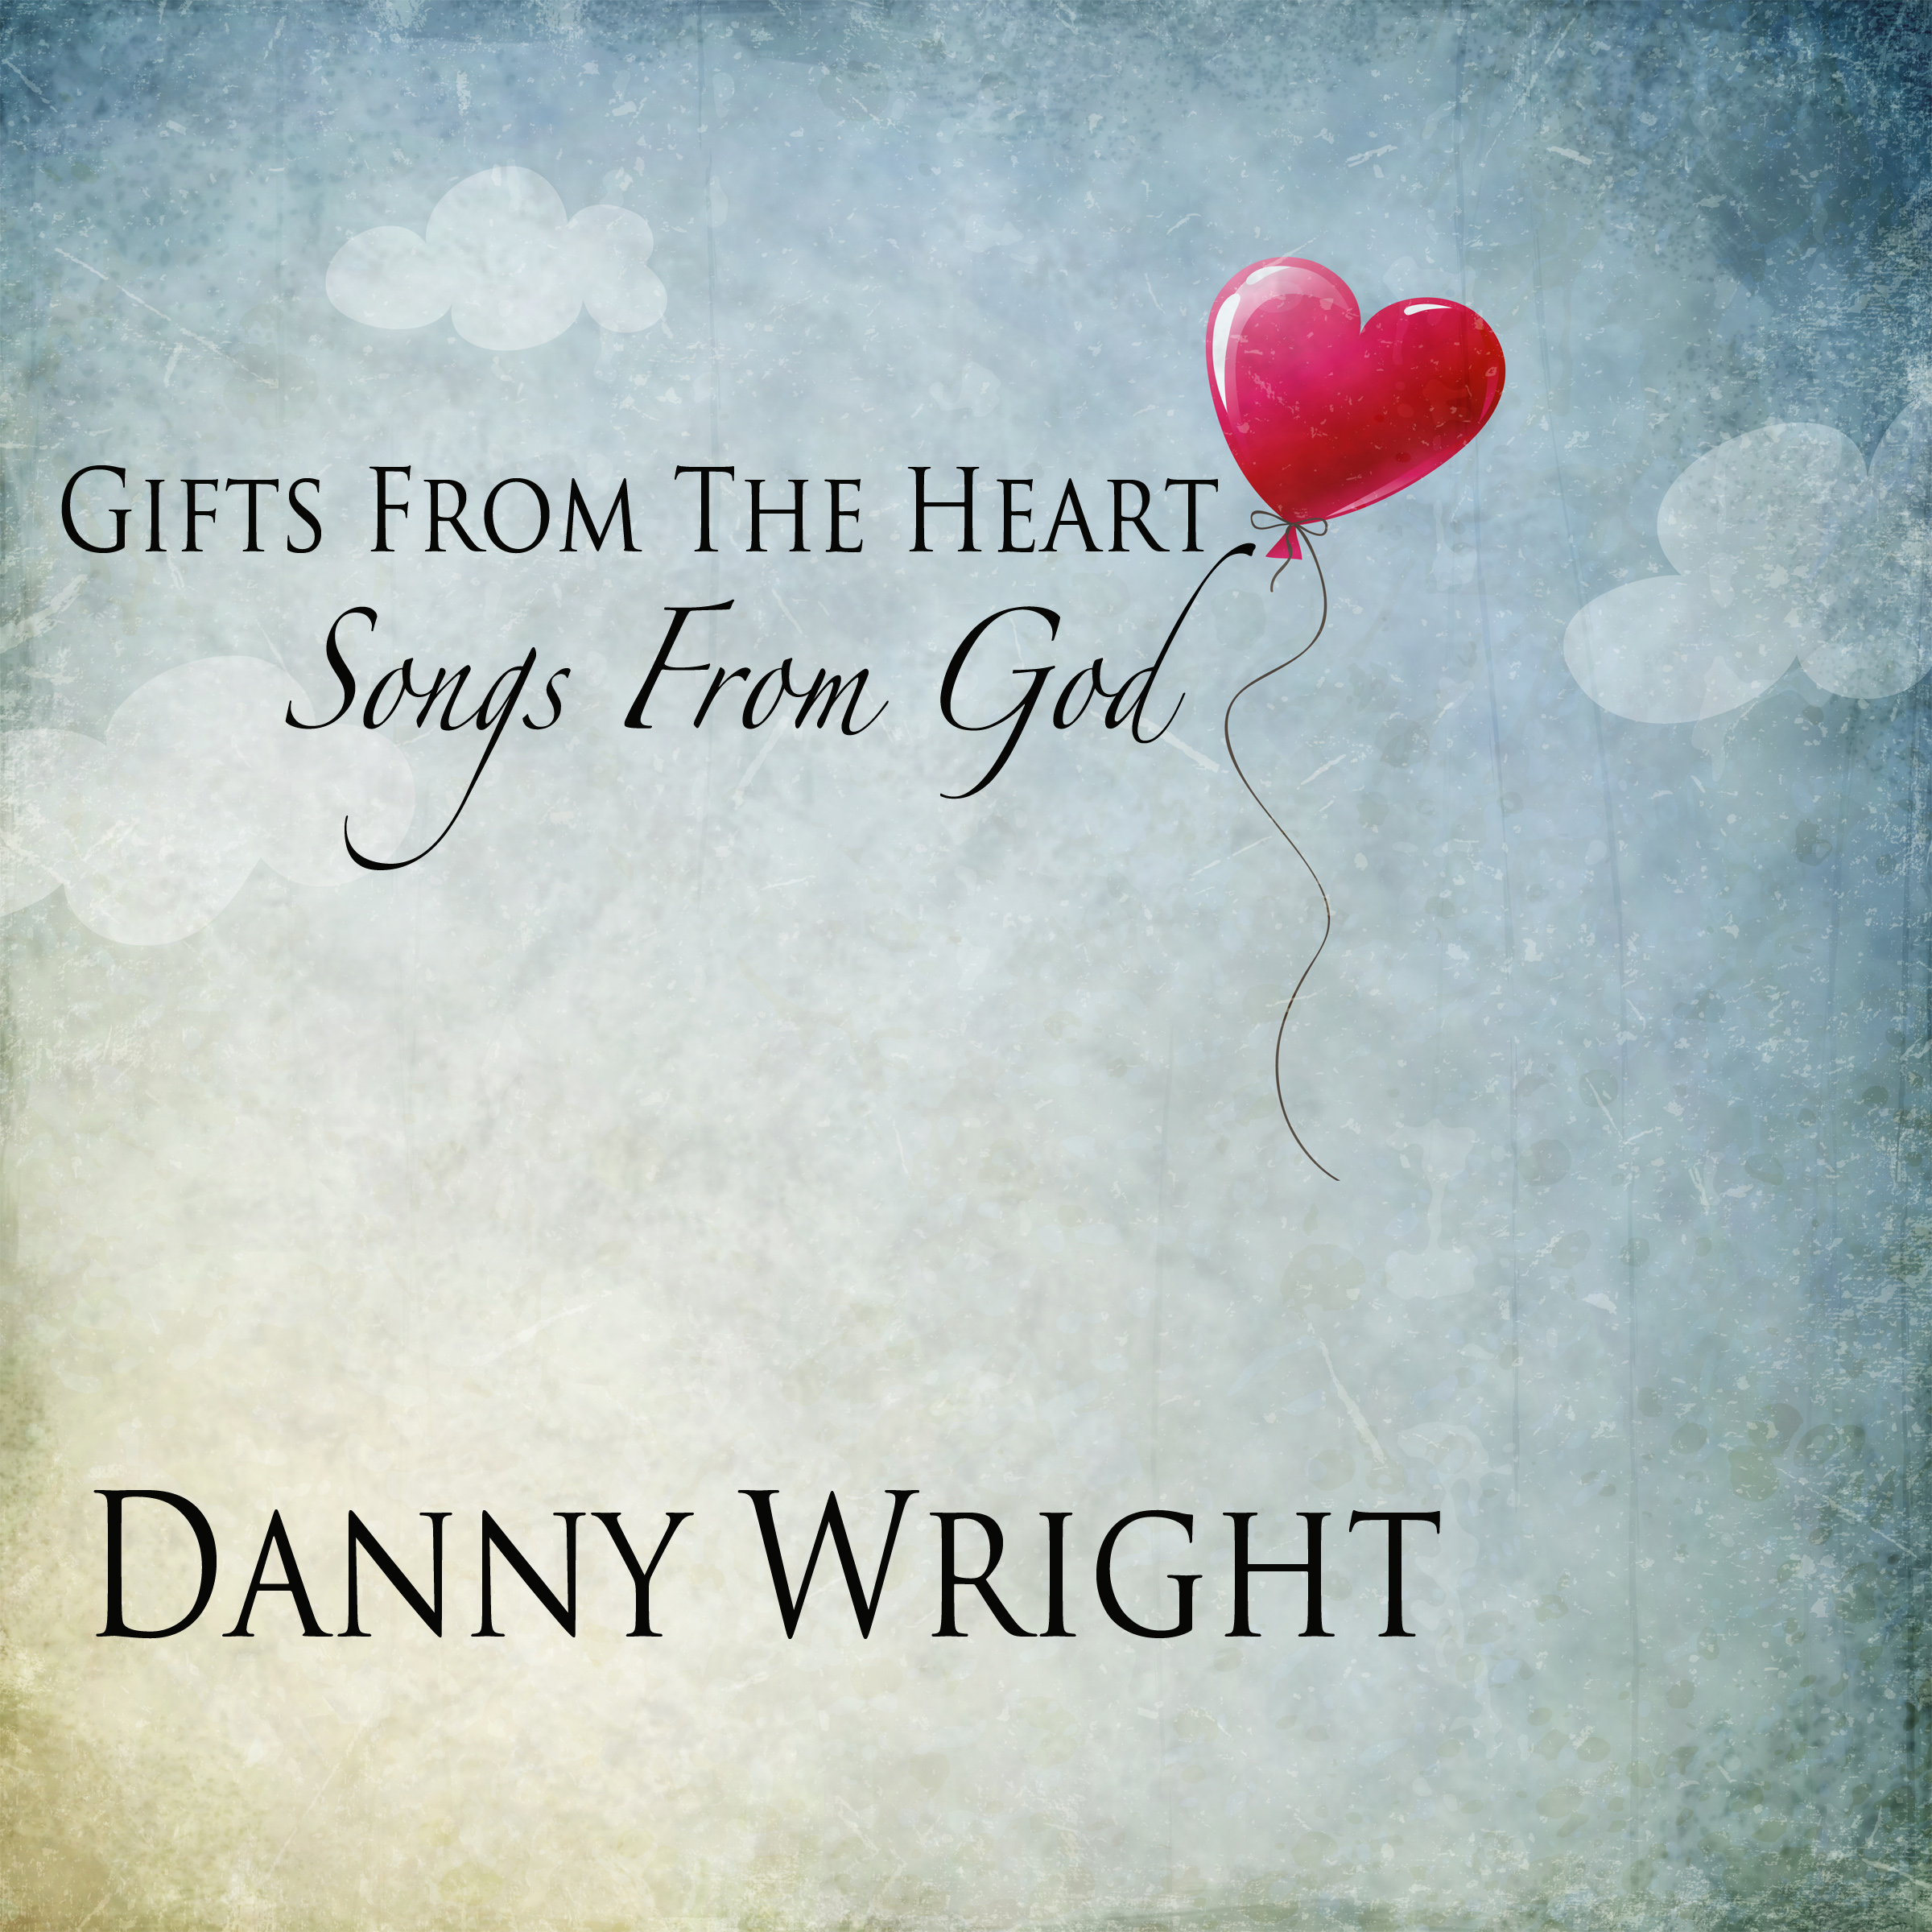 Gifts from the Heart, a 2-CD collection by Danny Wright